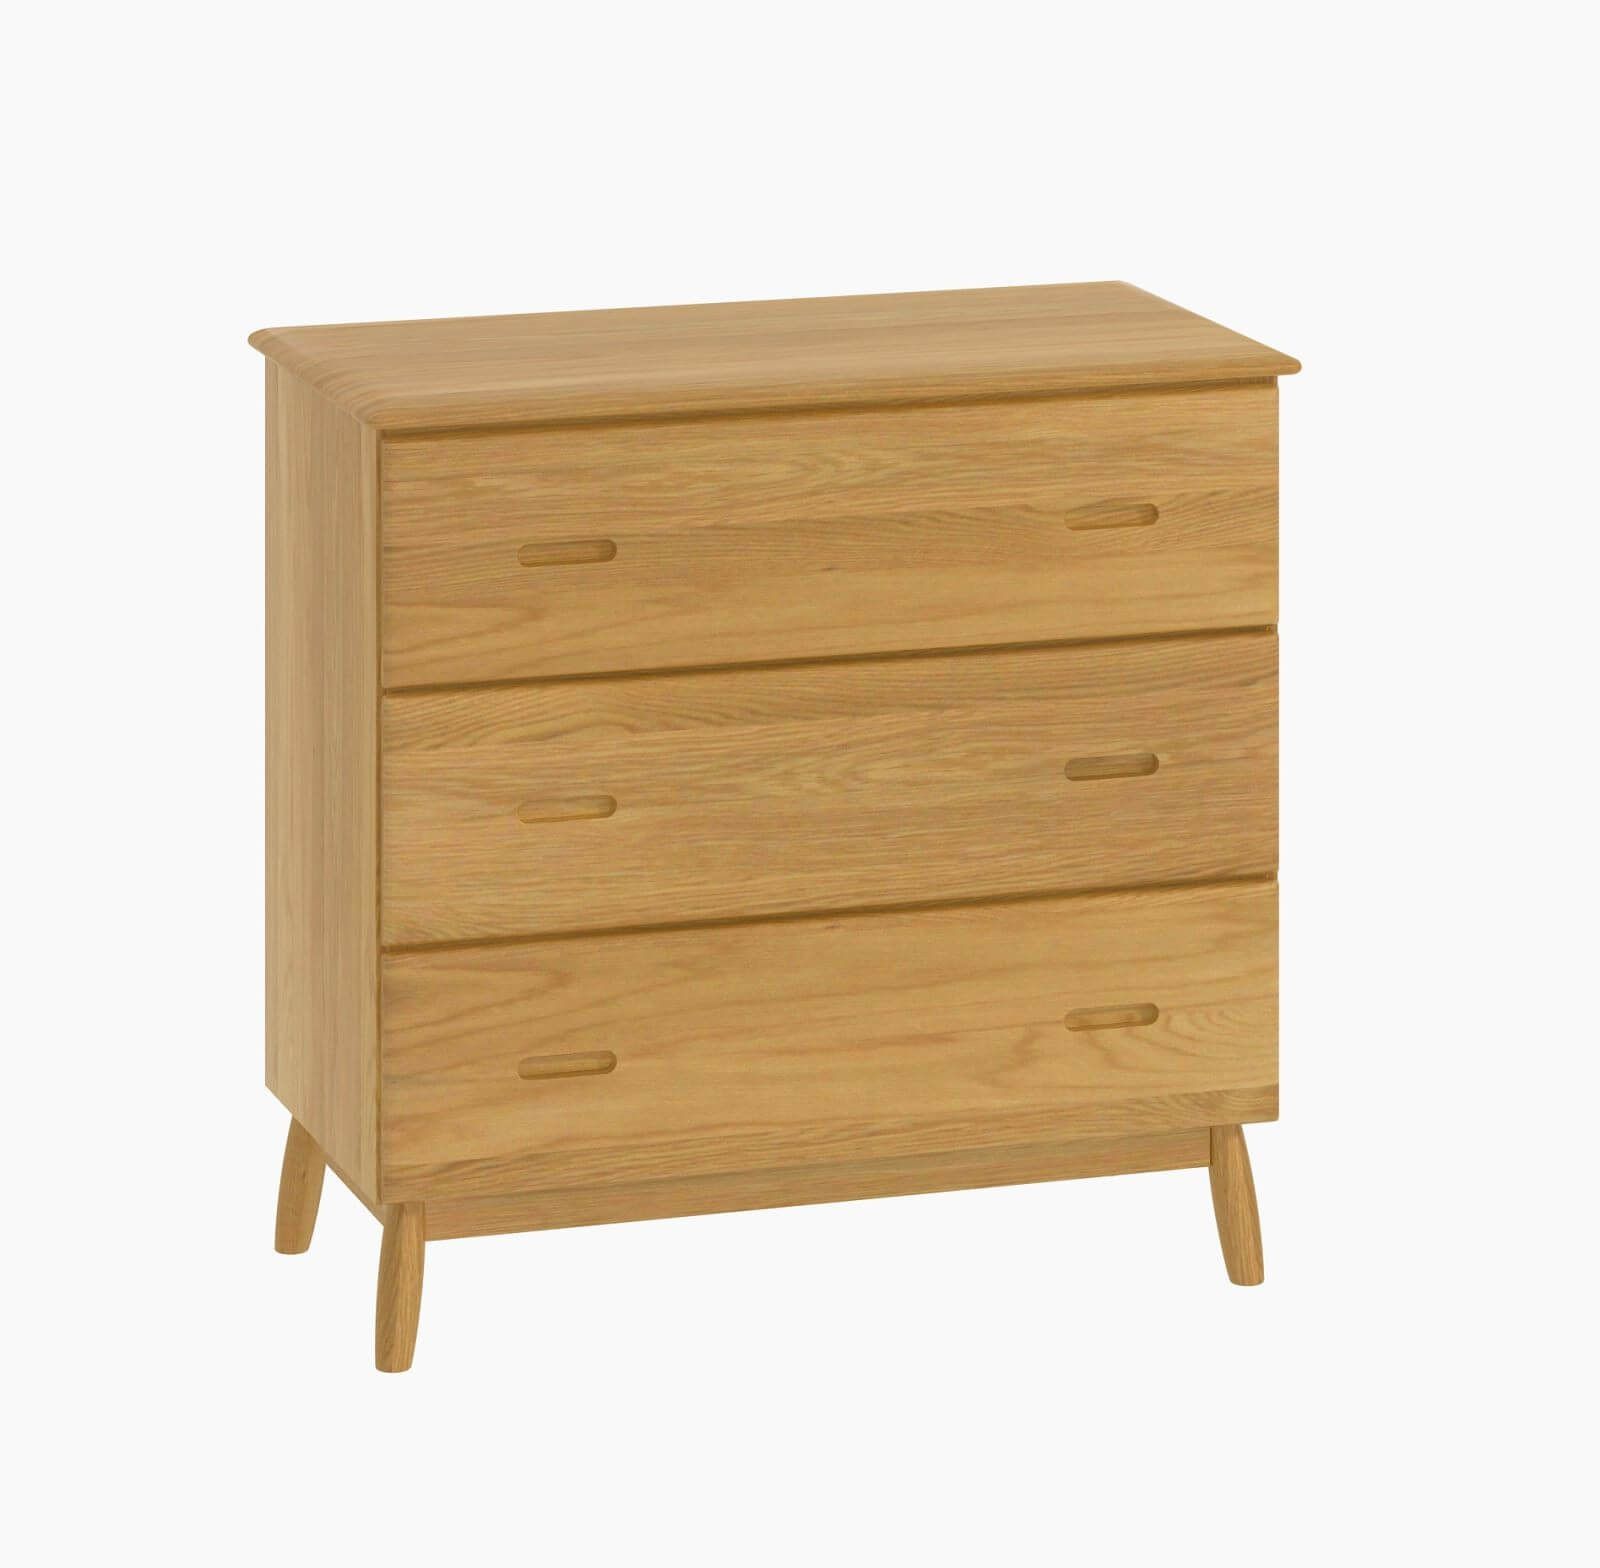 Showing image for Bergen 3-drawer chest